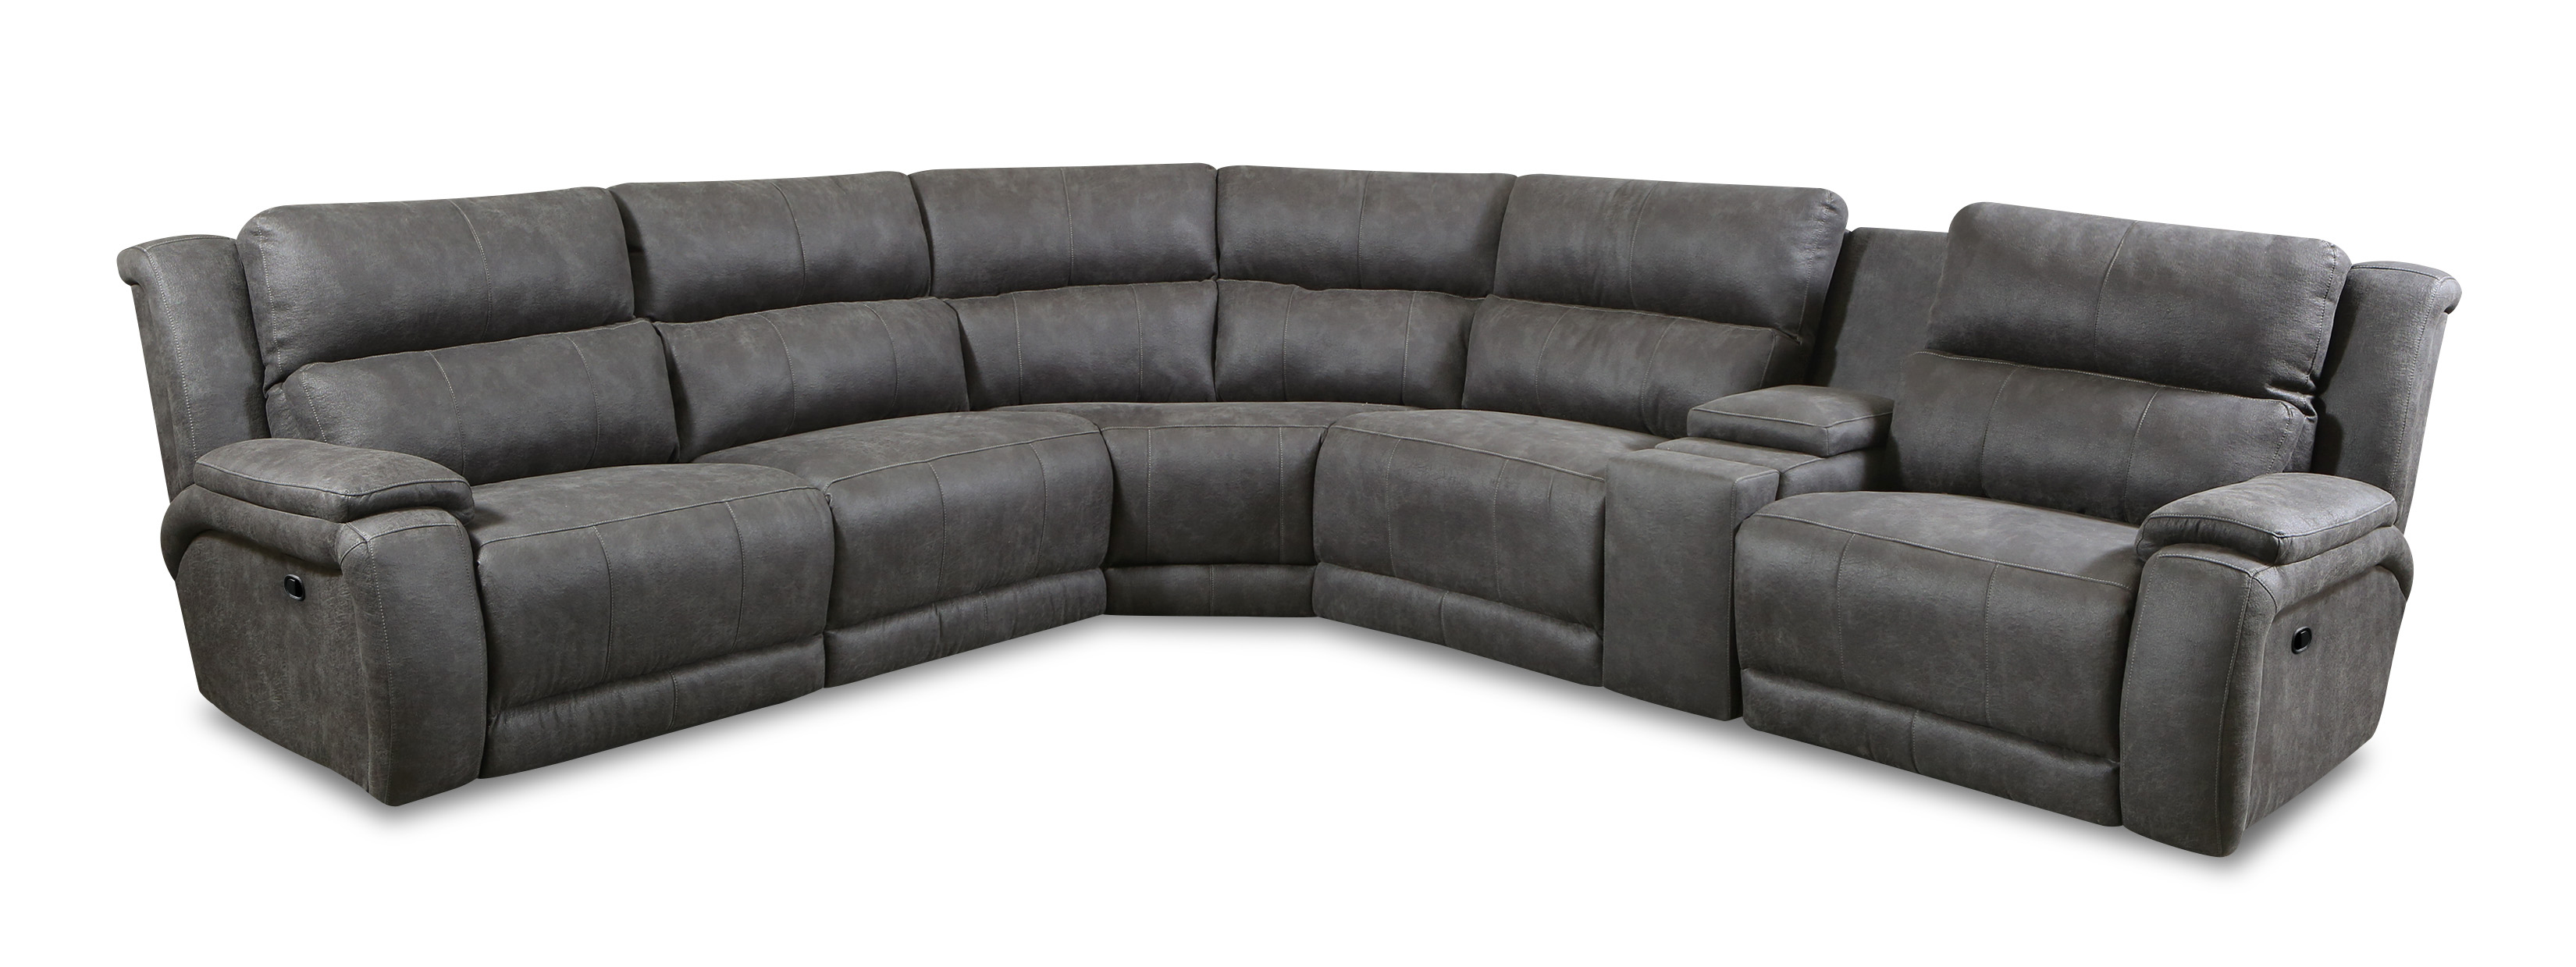 756 Sure Thing Sectional Image